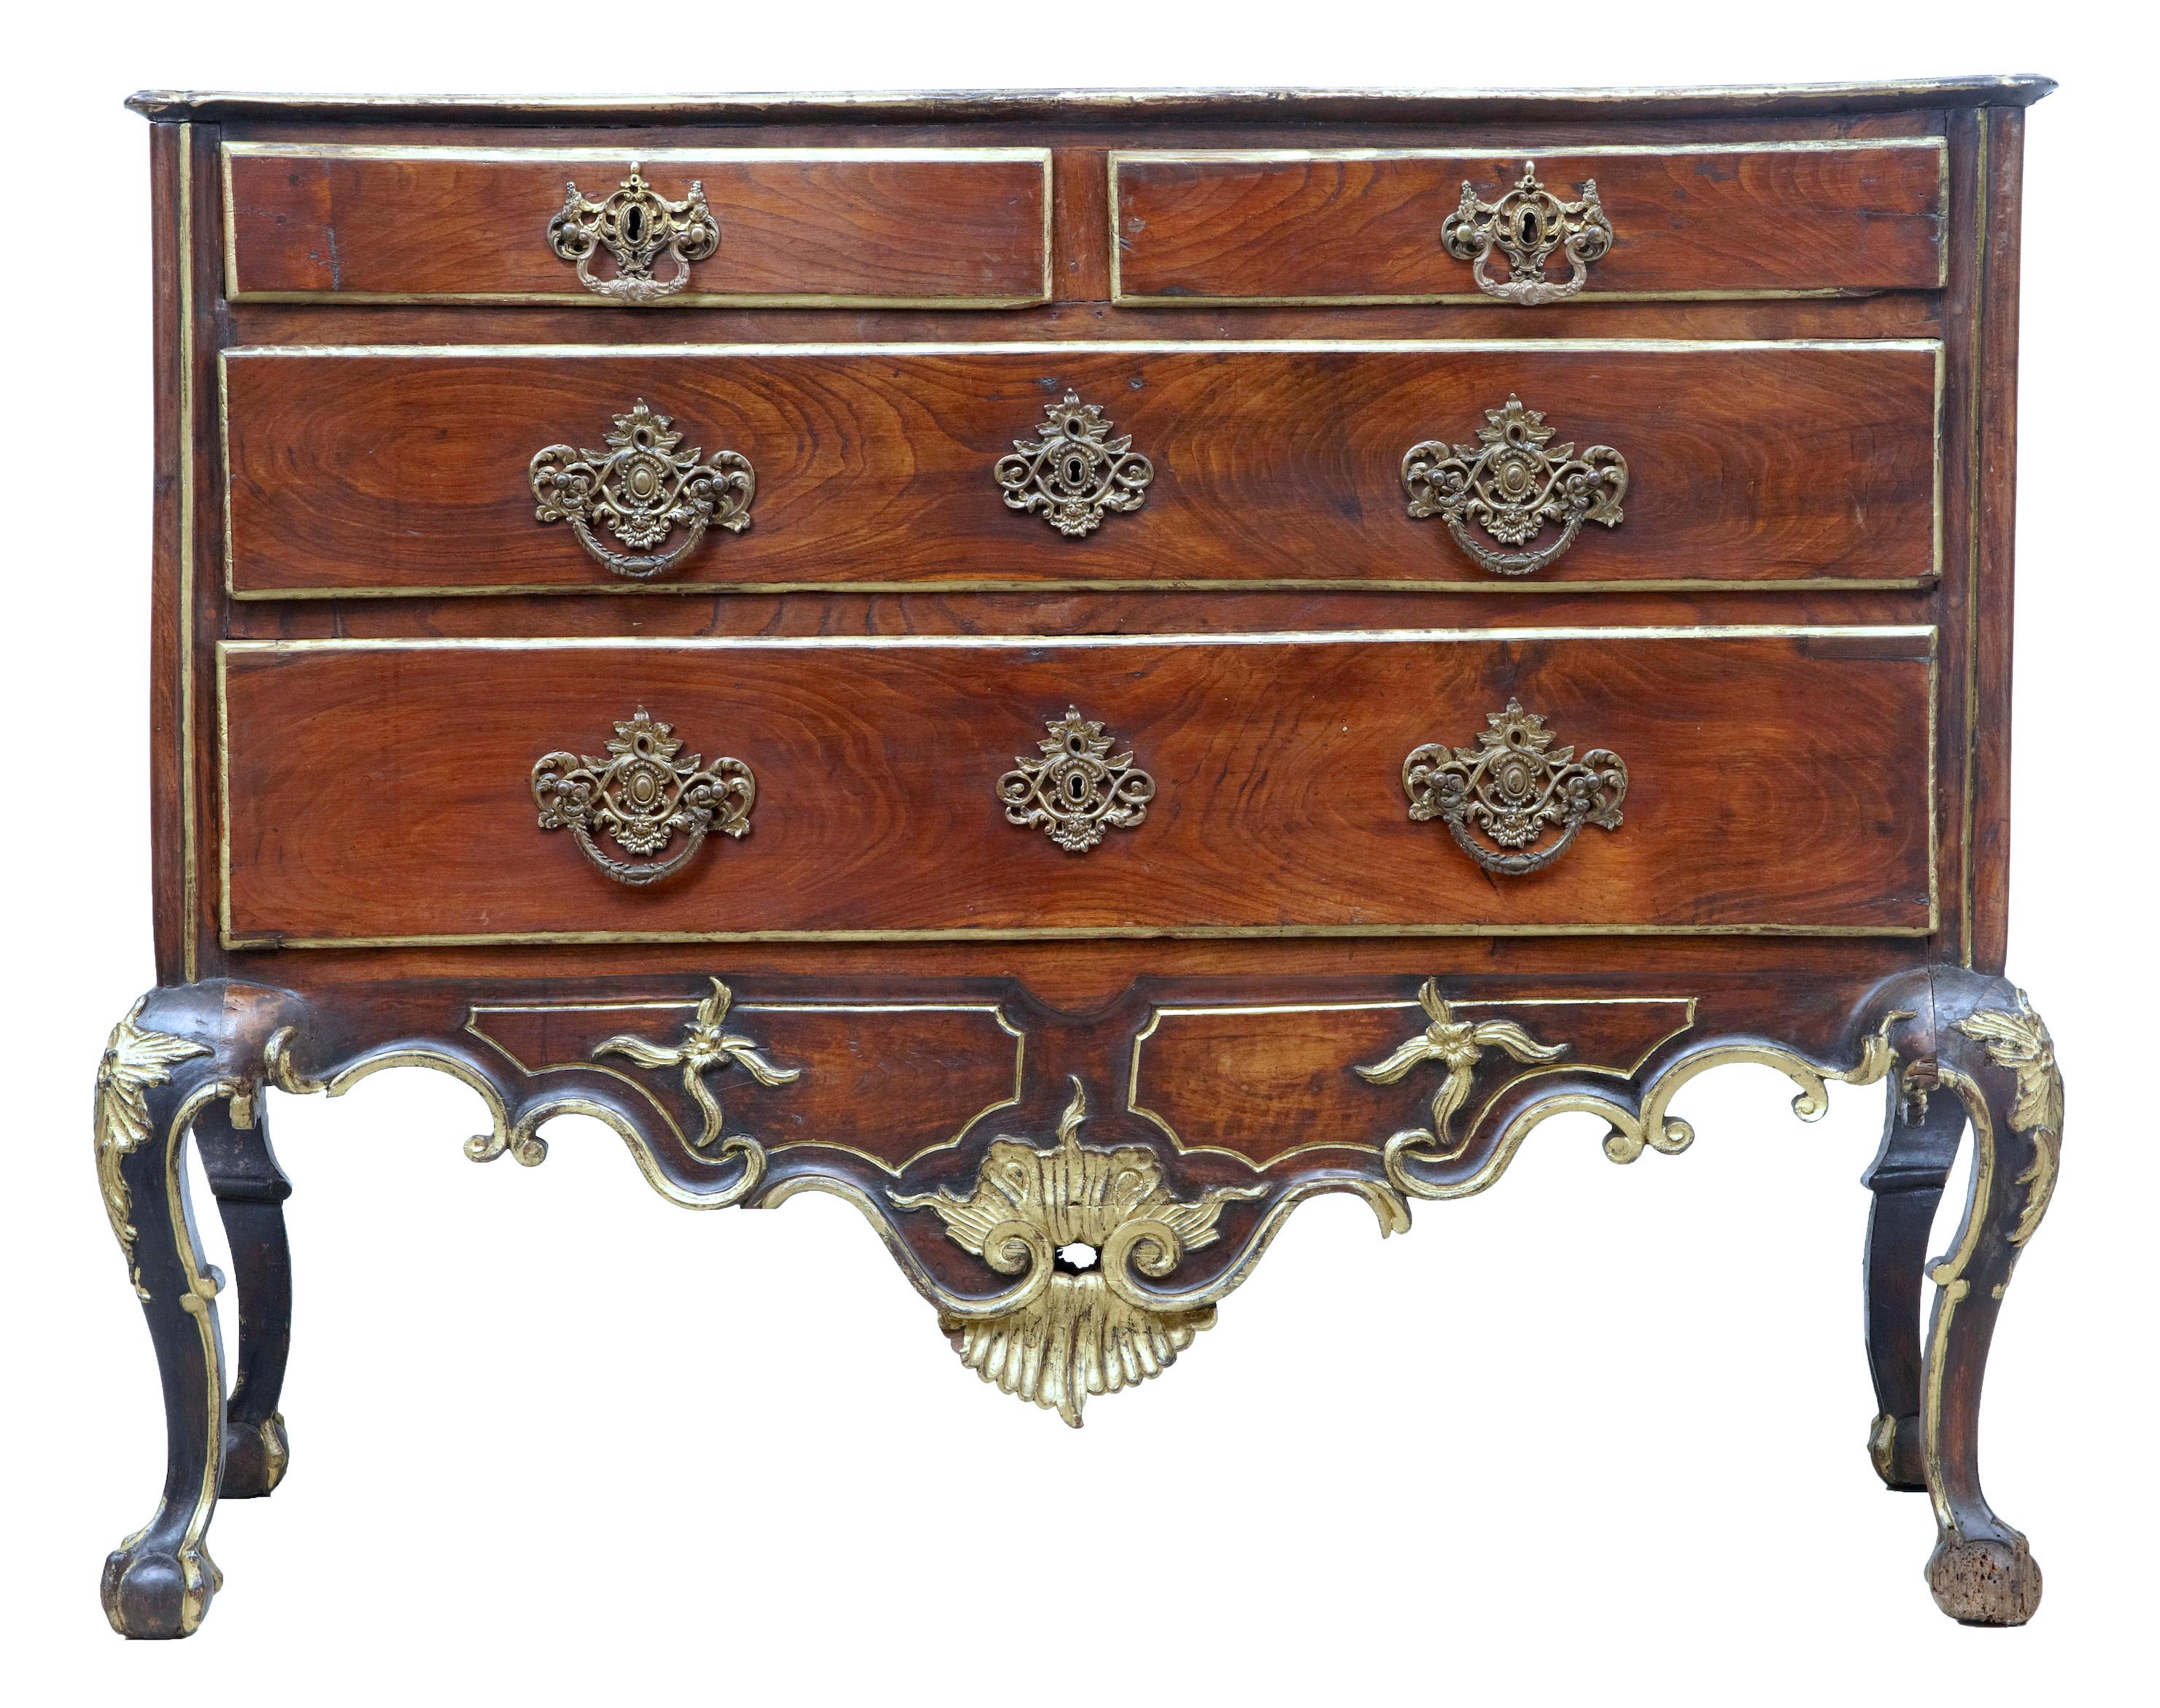 18th century Portuguese carved walnut and gilt commode, circa 1770.

Excellent quality Dom Jose period commode circa 1770. 2 short over 2 long drawers. Profusely carved and detailed with parcel gilt decoration, shells to the front frieze and